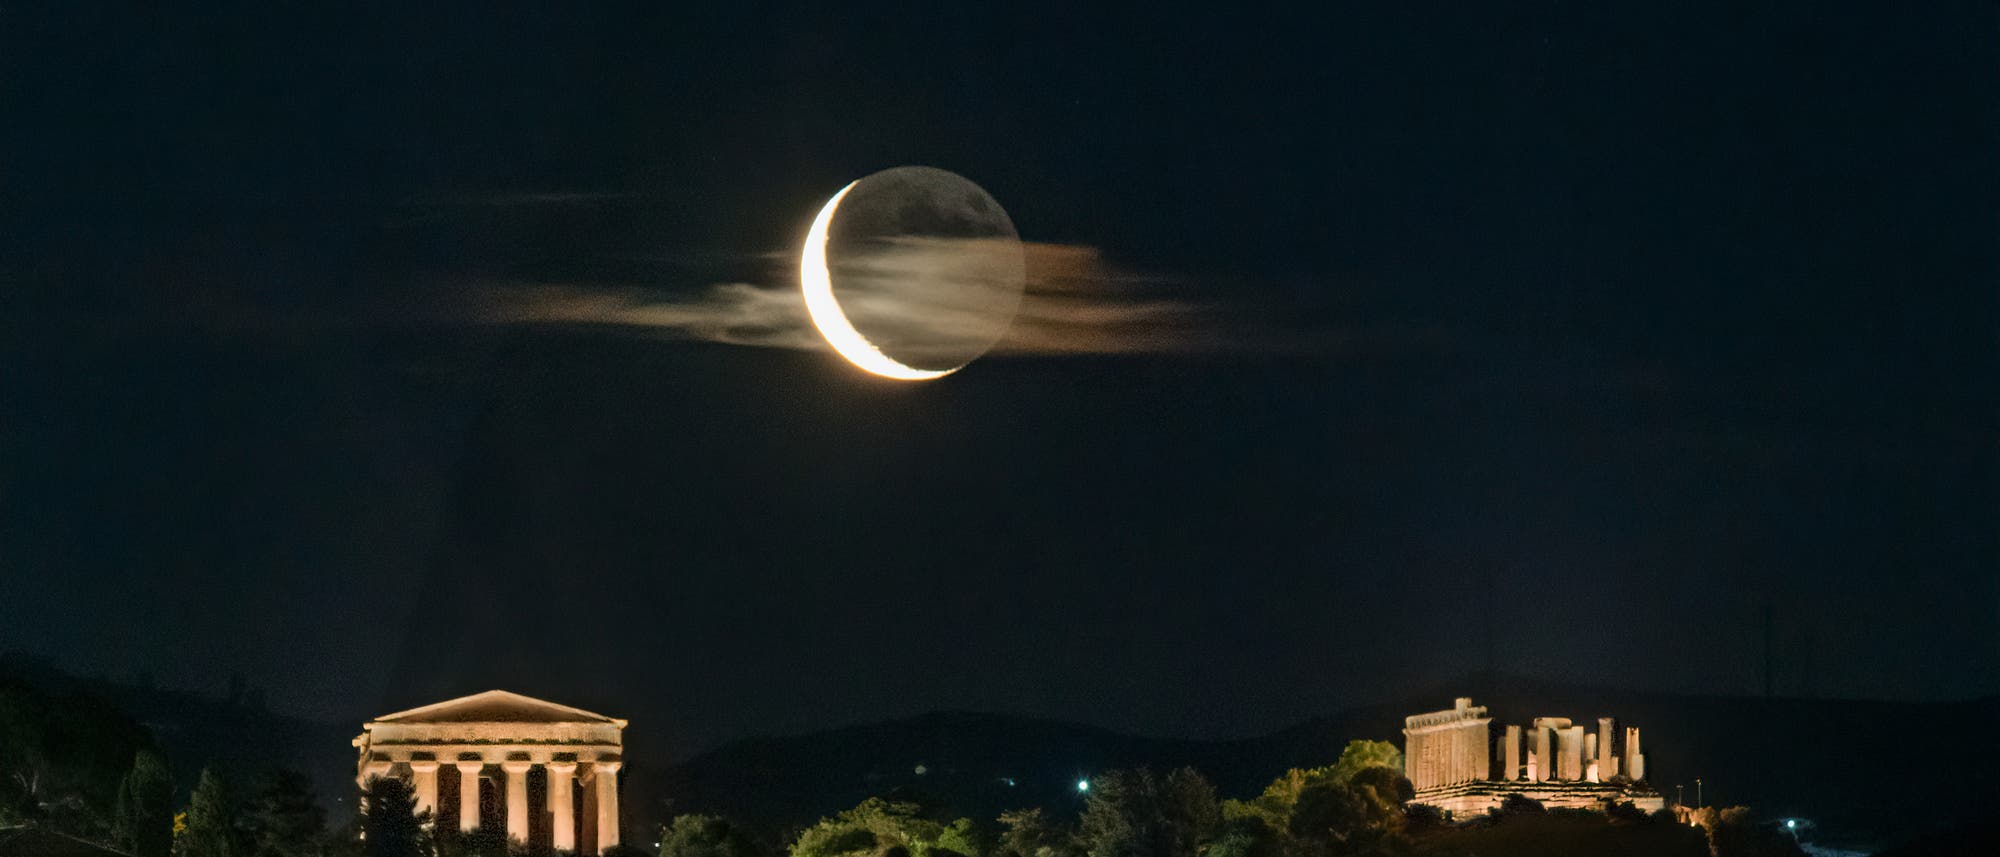 Moon, Mars and the Greek Temples of the Valley of the Temples